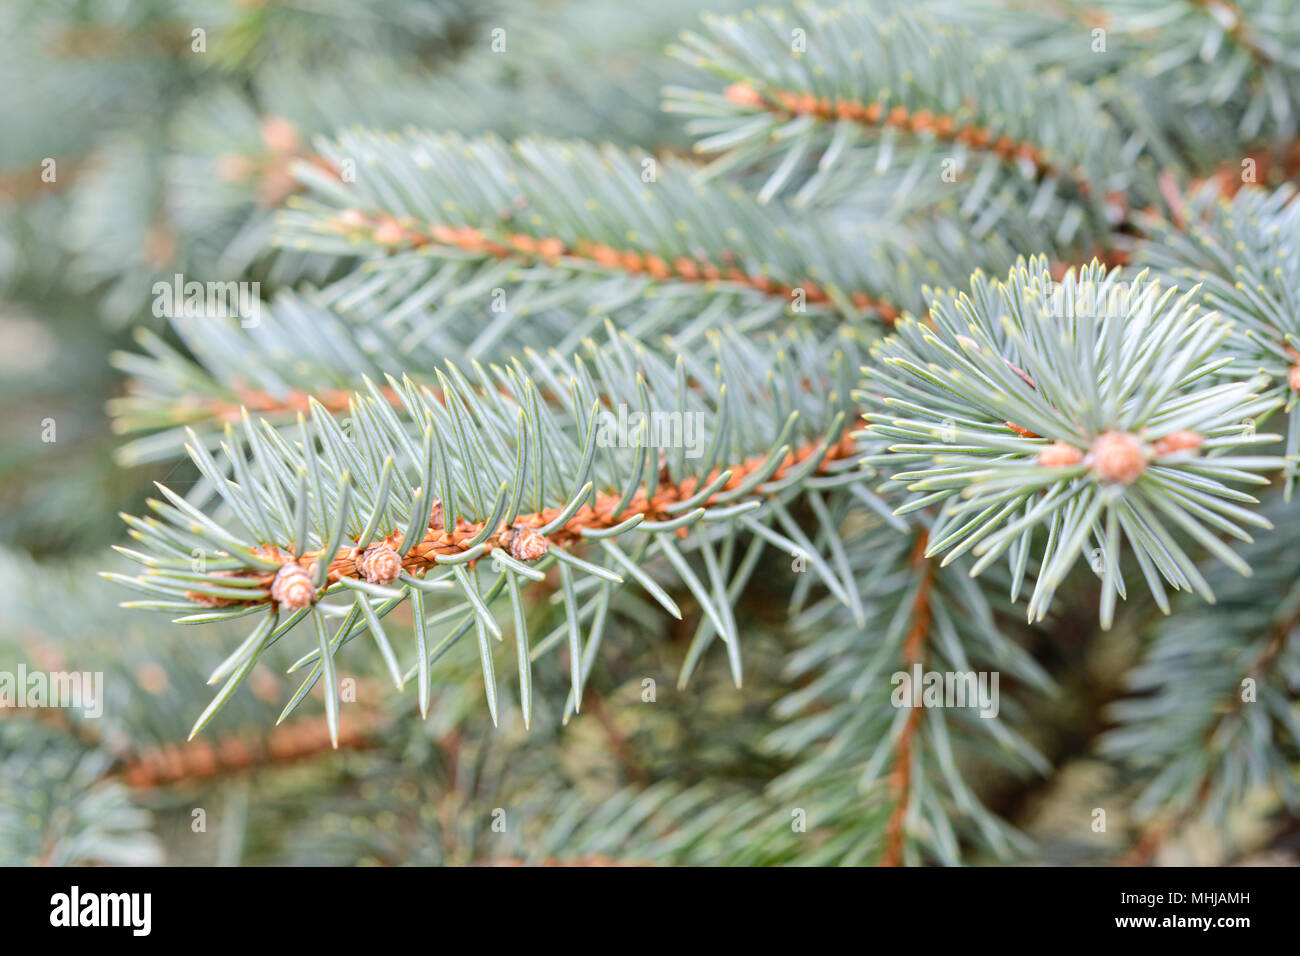 Abstract garden background - green spruce branches in close-up (selective depth of field). Stock Photo